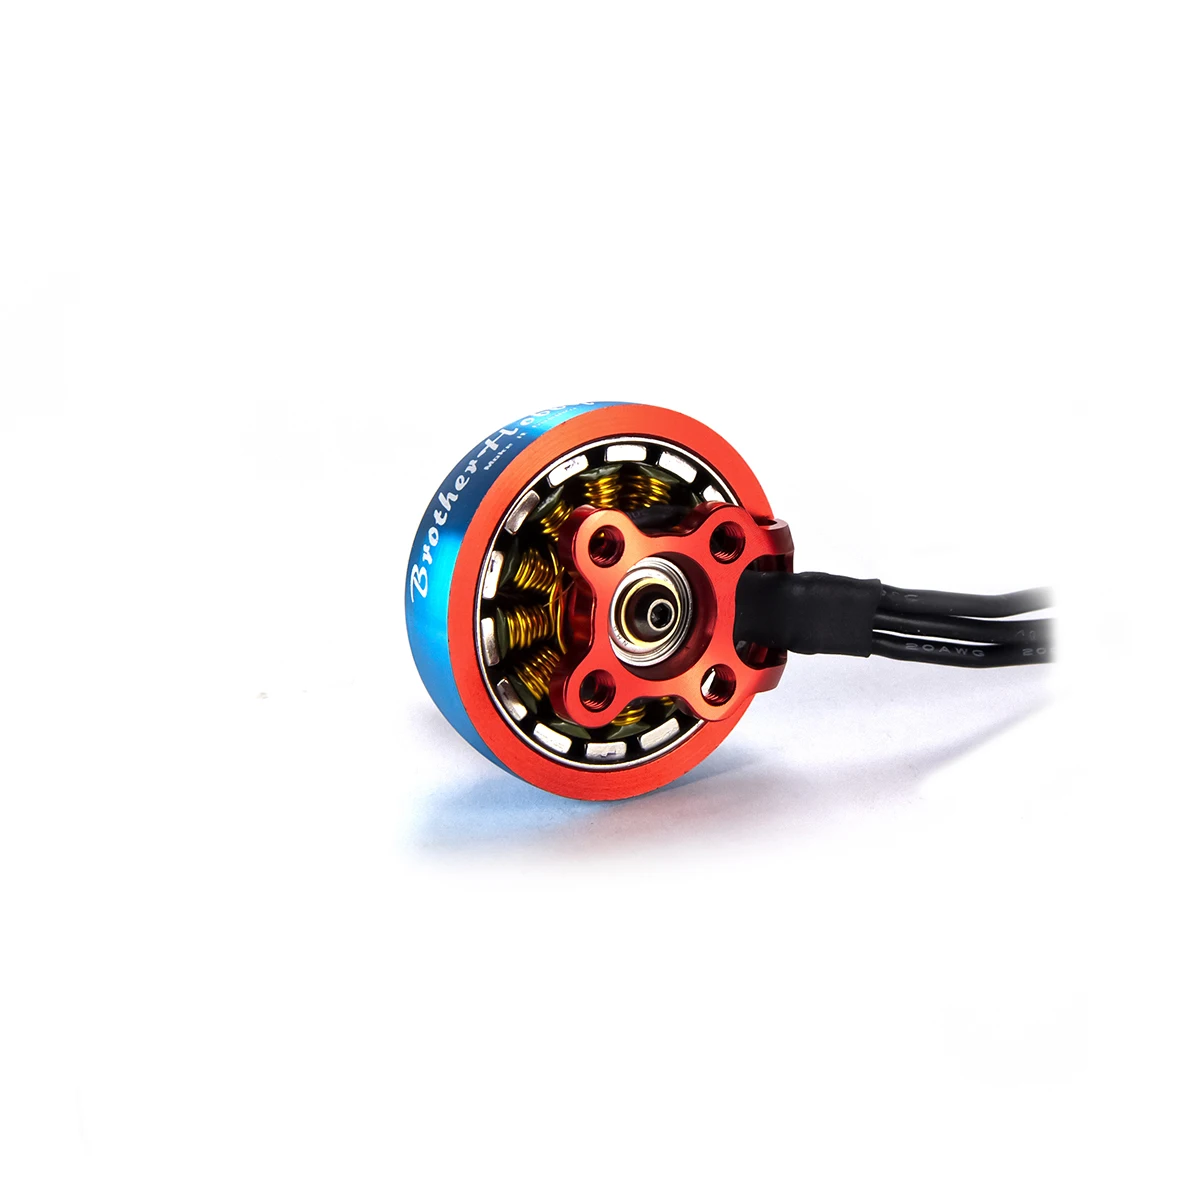 

BrotherHobby DXA 2207.5 1920KV 1750KV 6S Brushless Motor for RC FPV Racing Freestyle Long Range 6S Drones DIY Replacements